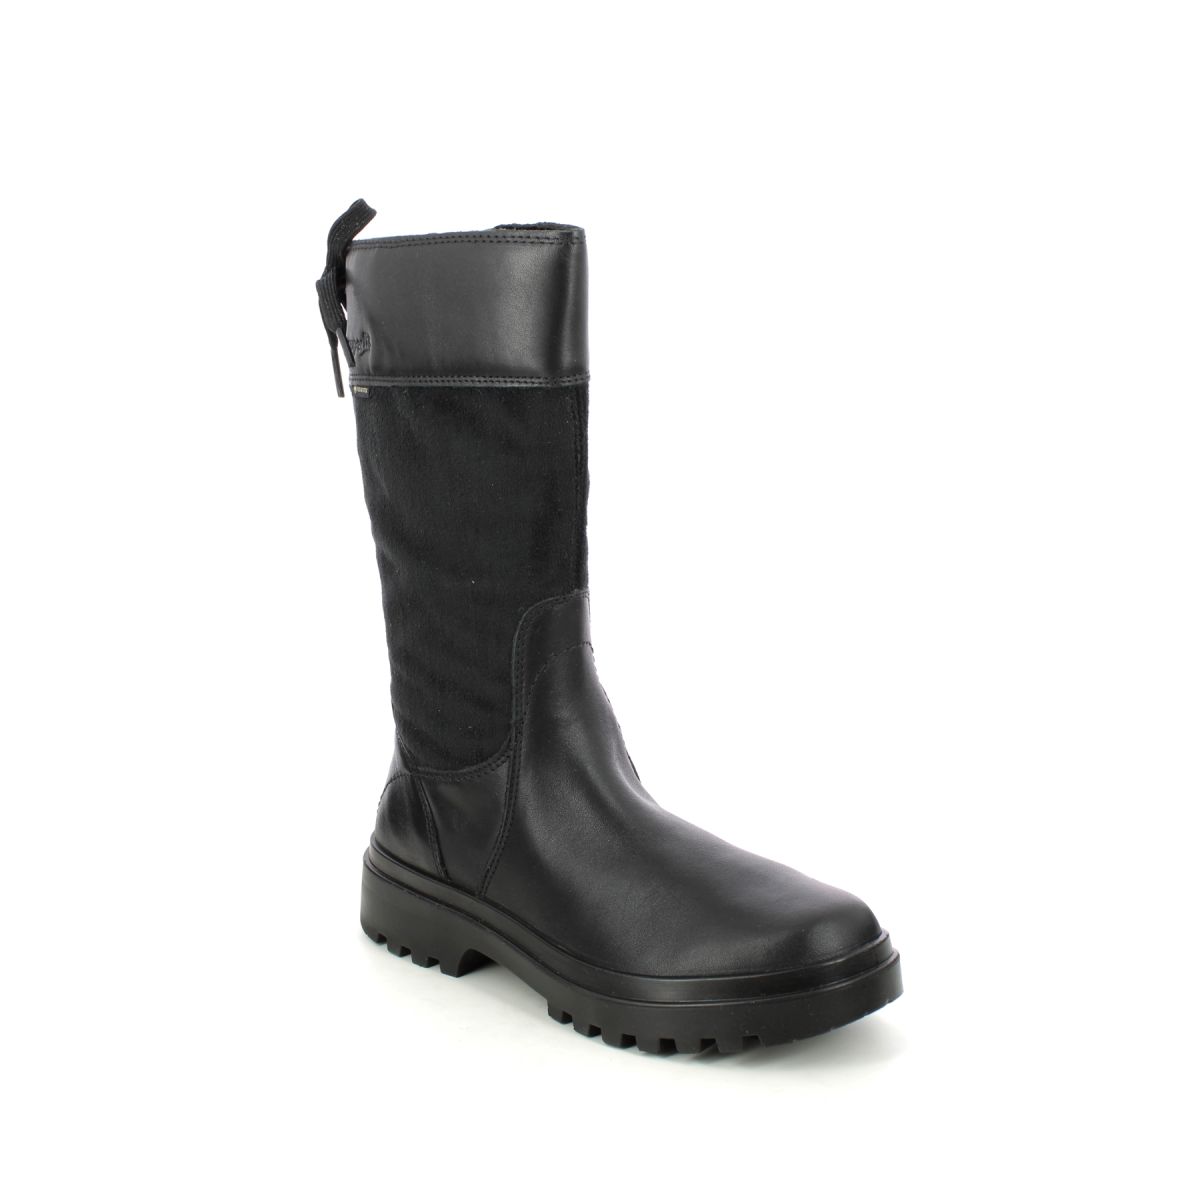 Superfit Abby Long Gtx Black Leather Kids Girls Boots 1000605-0000 In Size 38 In Plain Black Leather For kids